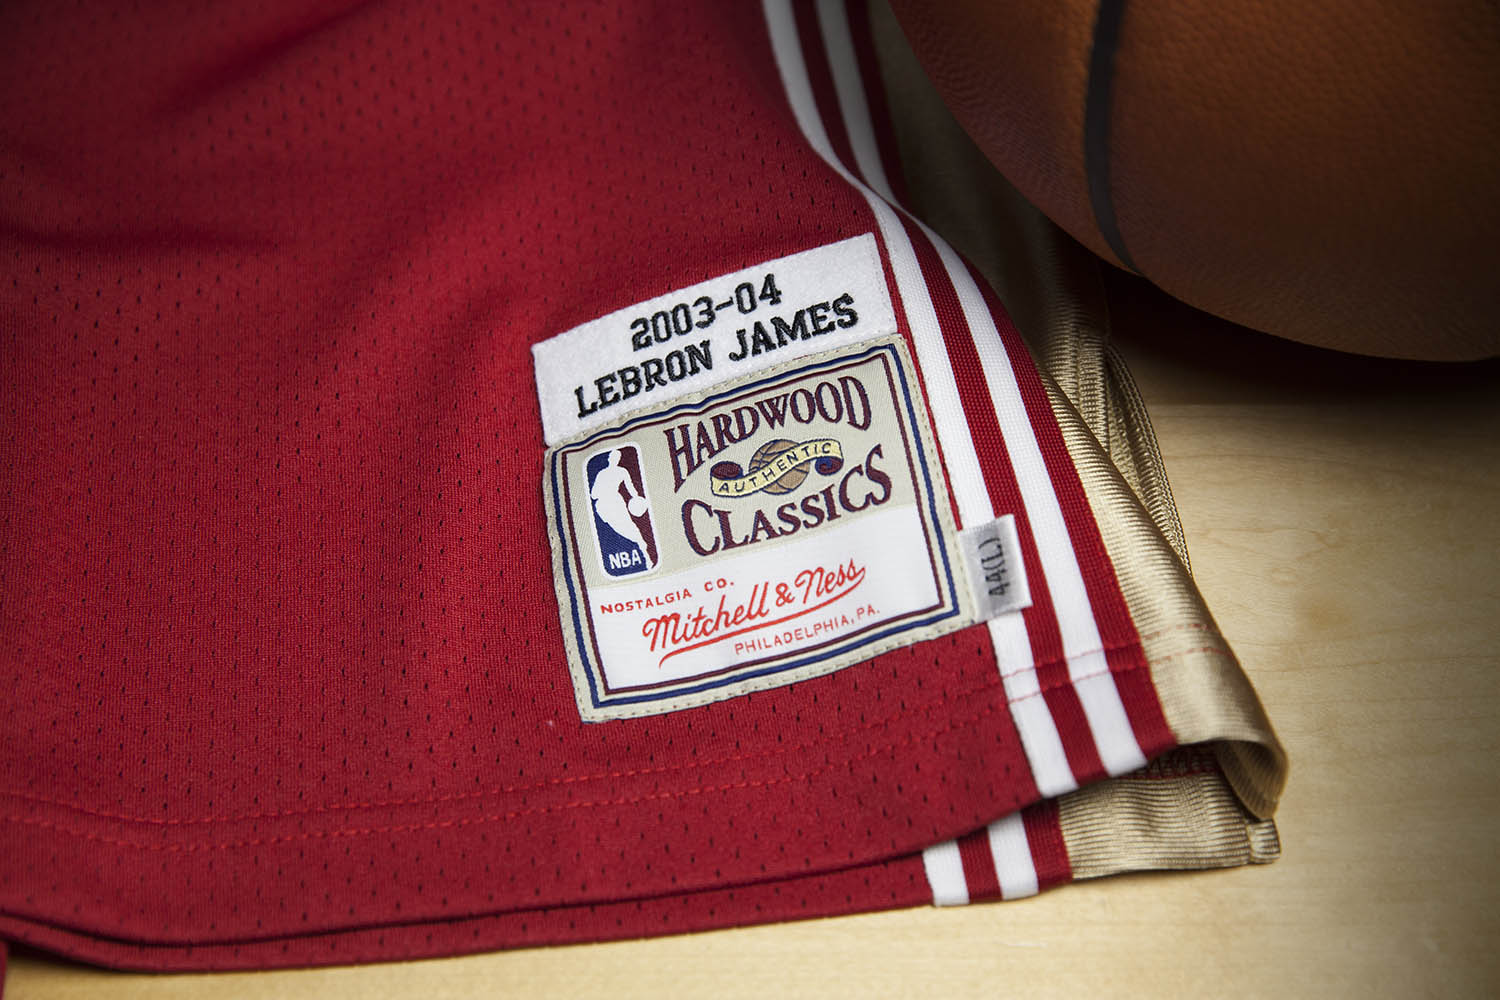 Mitchell & Ness Is Bringing Back LeBron James' Rookie Jersey